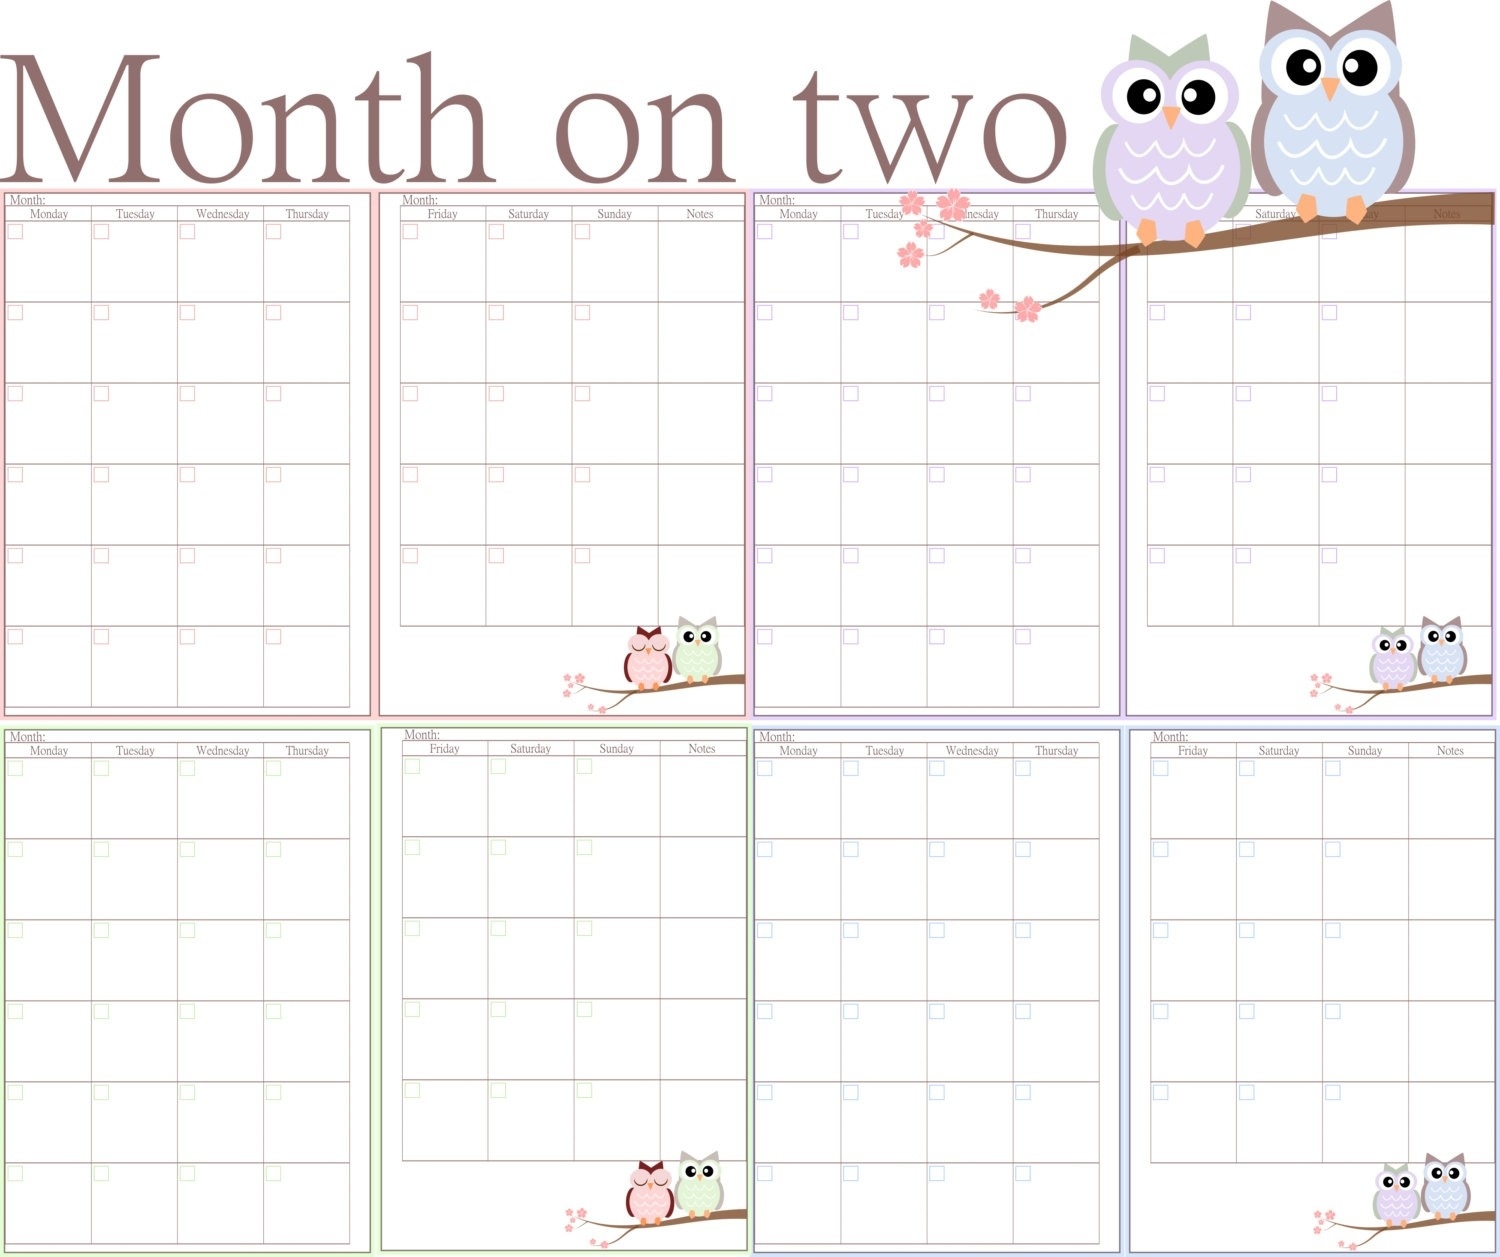 Free Printable Calendar Month View Archives - Hashtag Bg Calendar Month View Printable